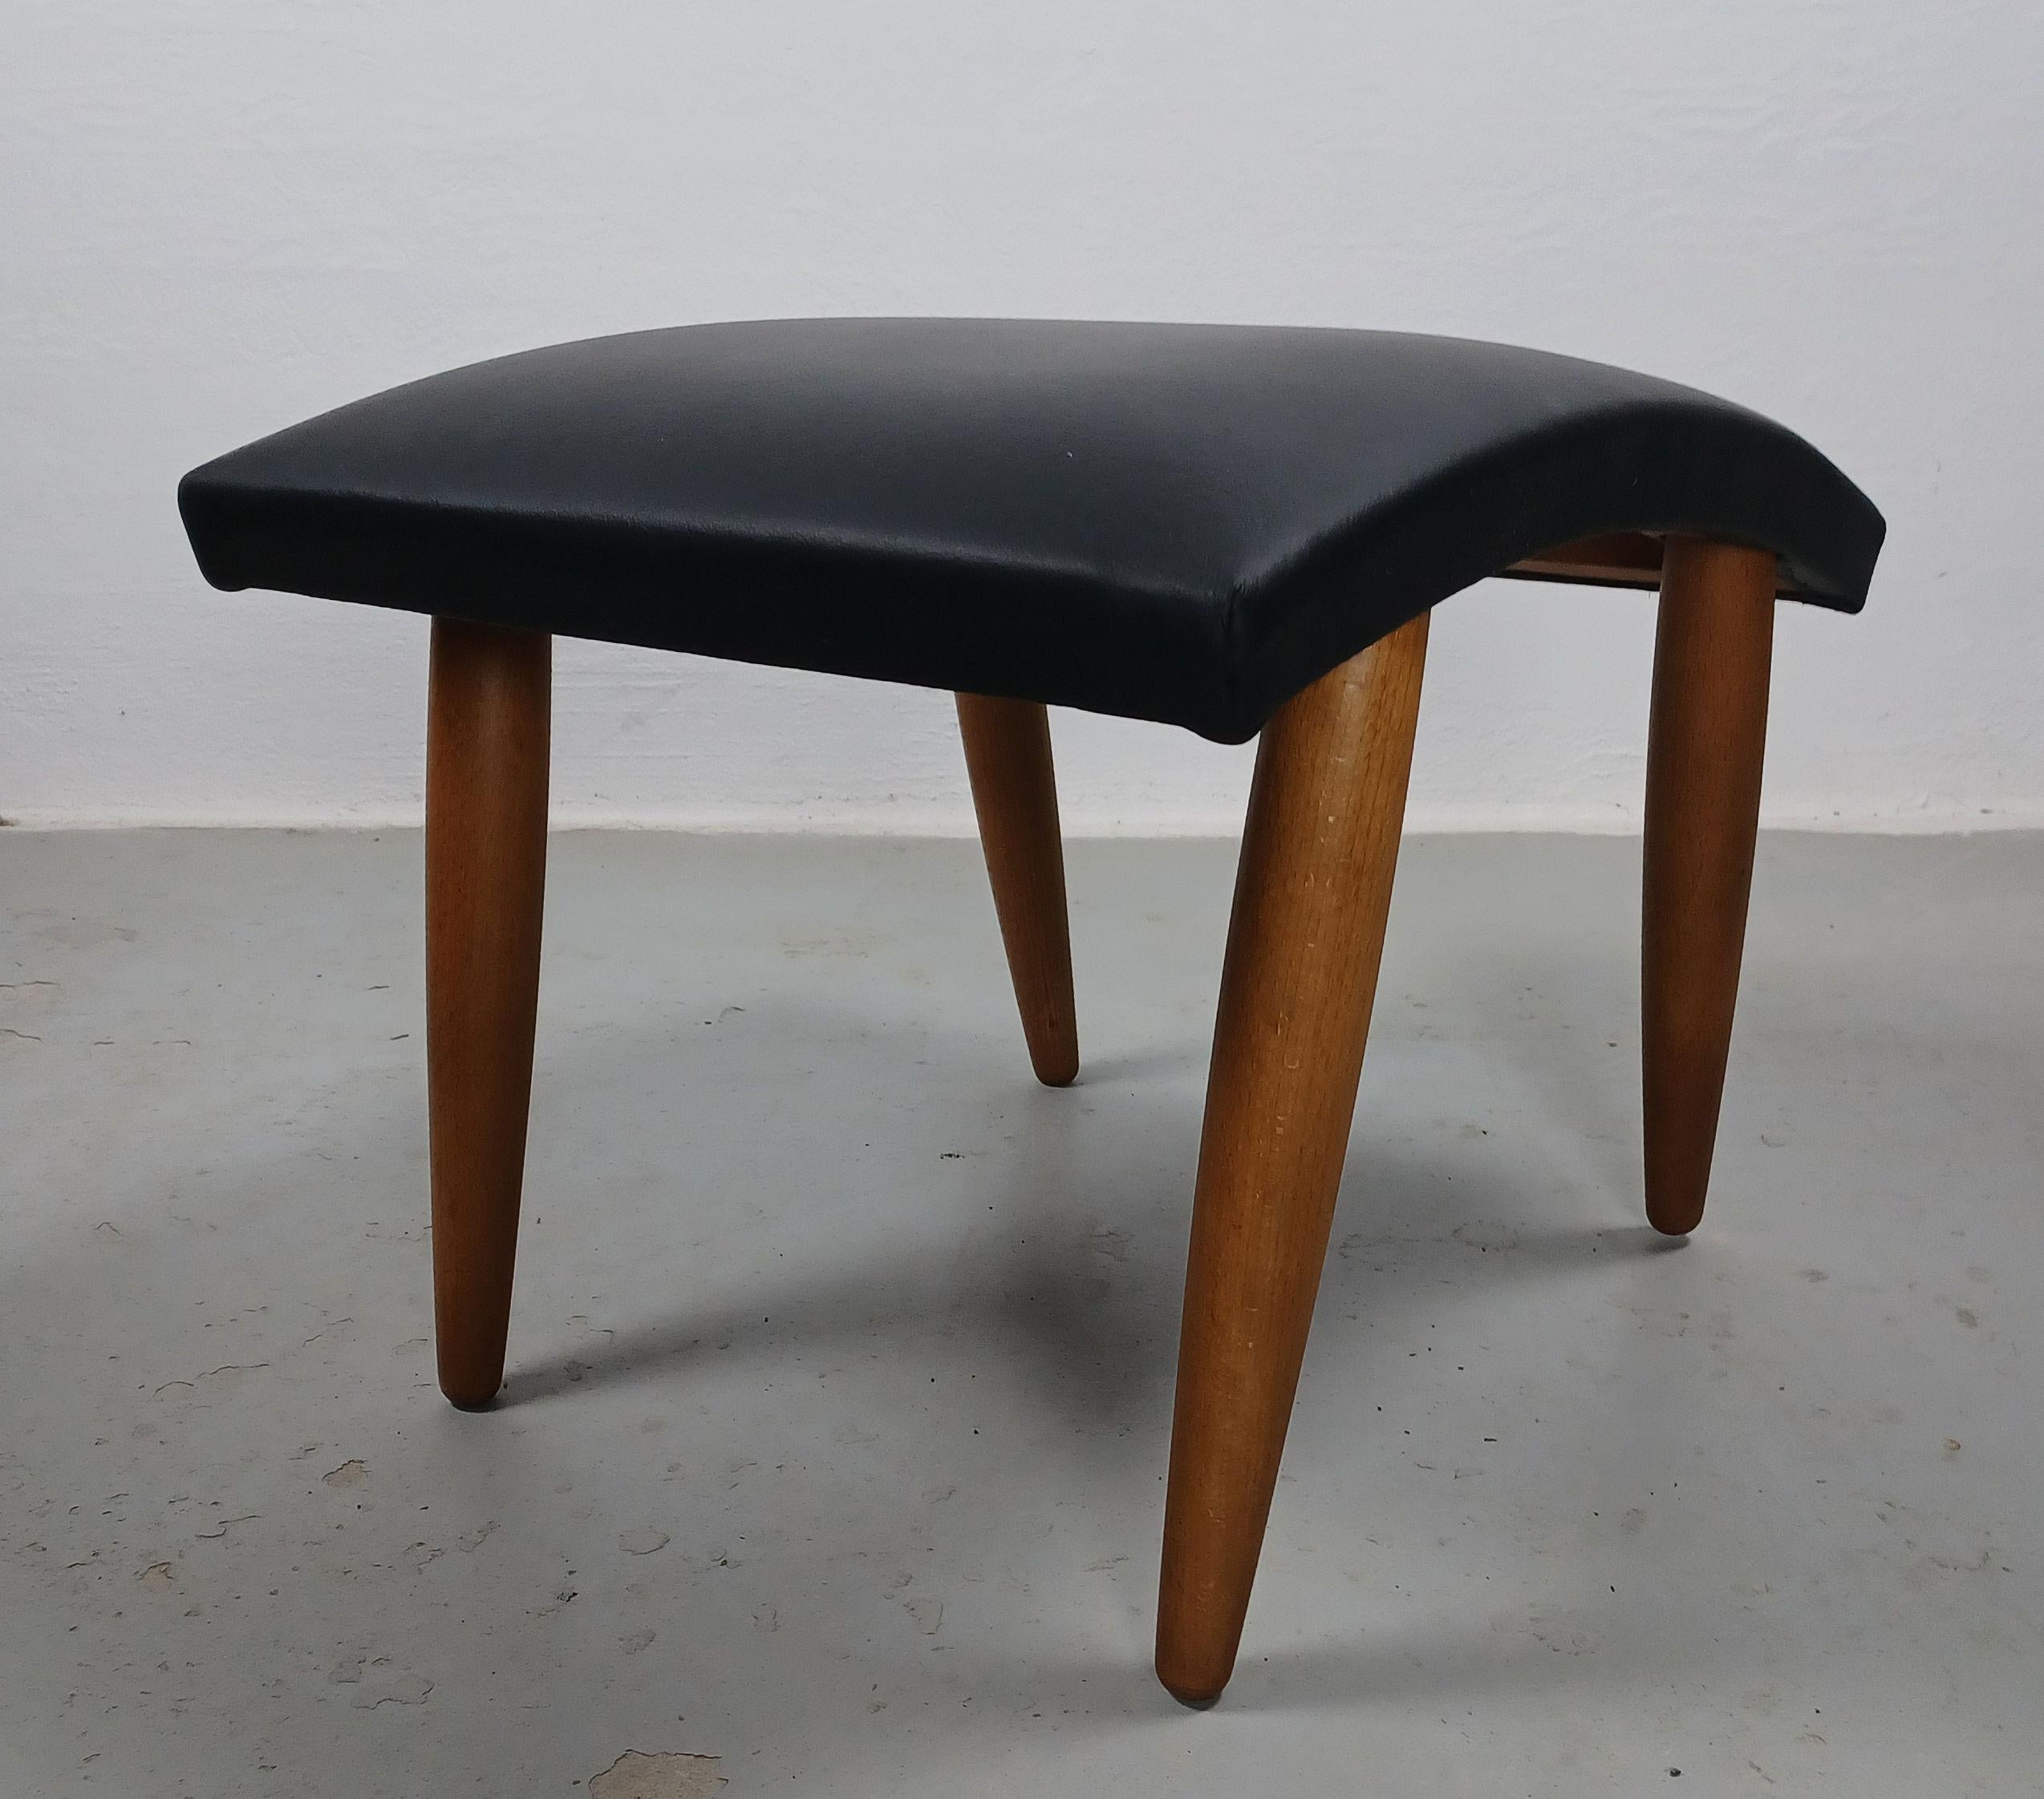 1960's, Restored Danish Footstool Reupholstered in Black Leather 2